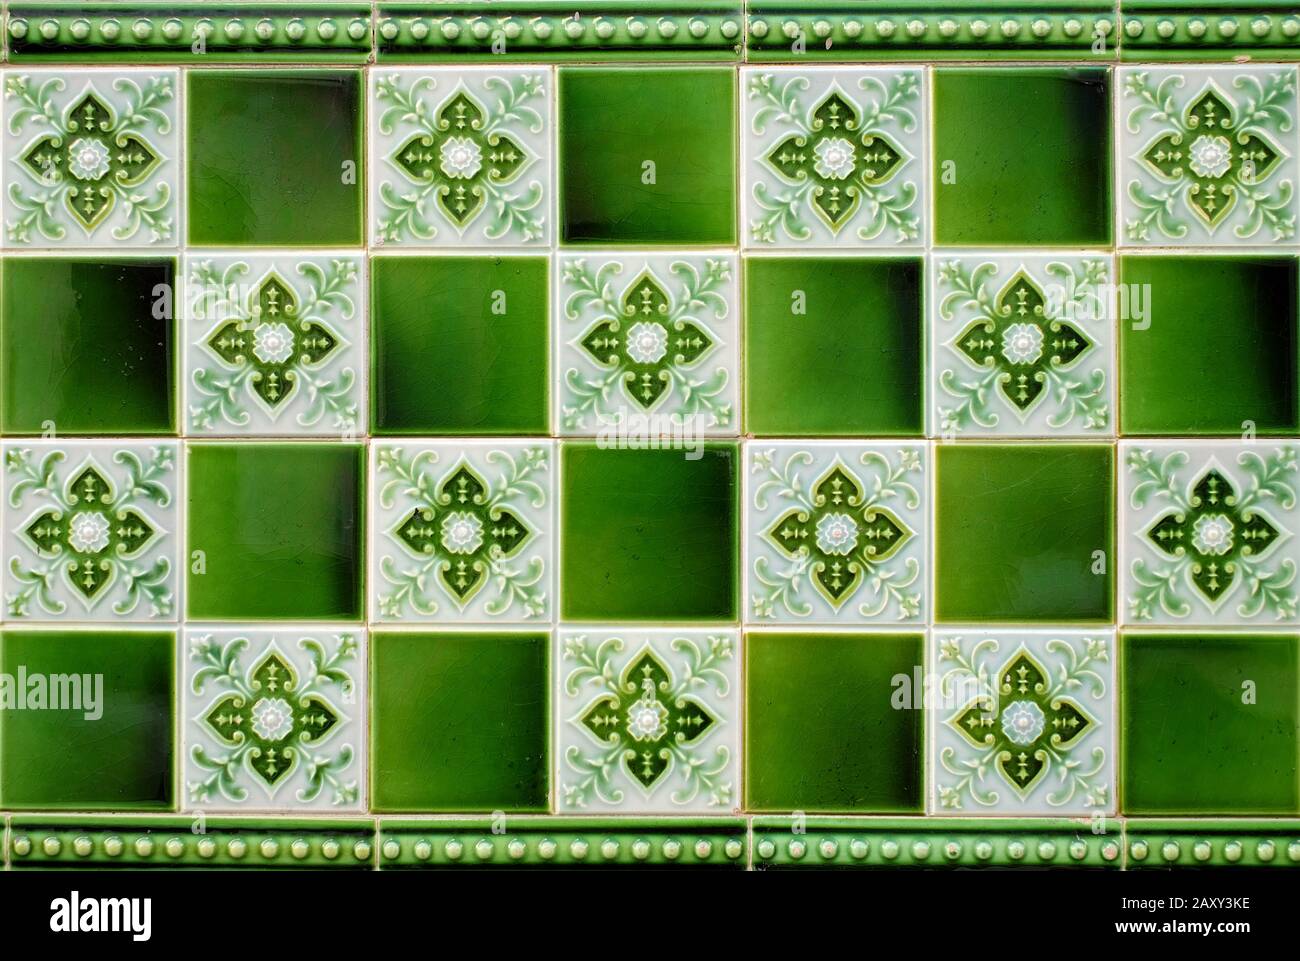 Floral green tiles, empty surface for copy text. Stock Photo